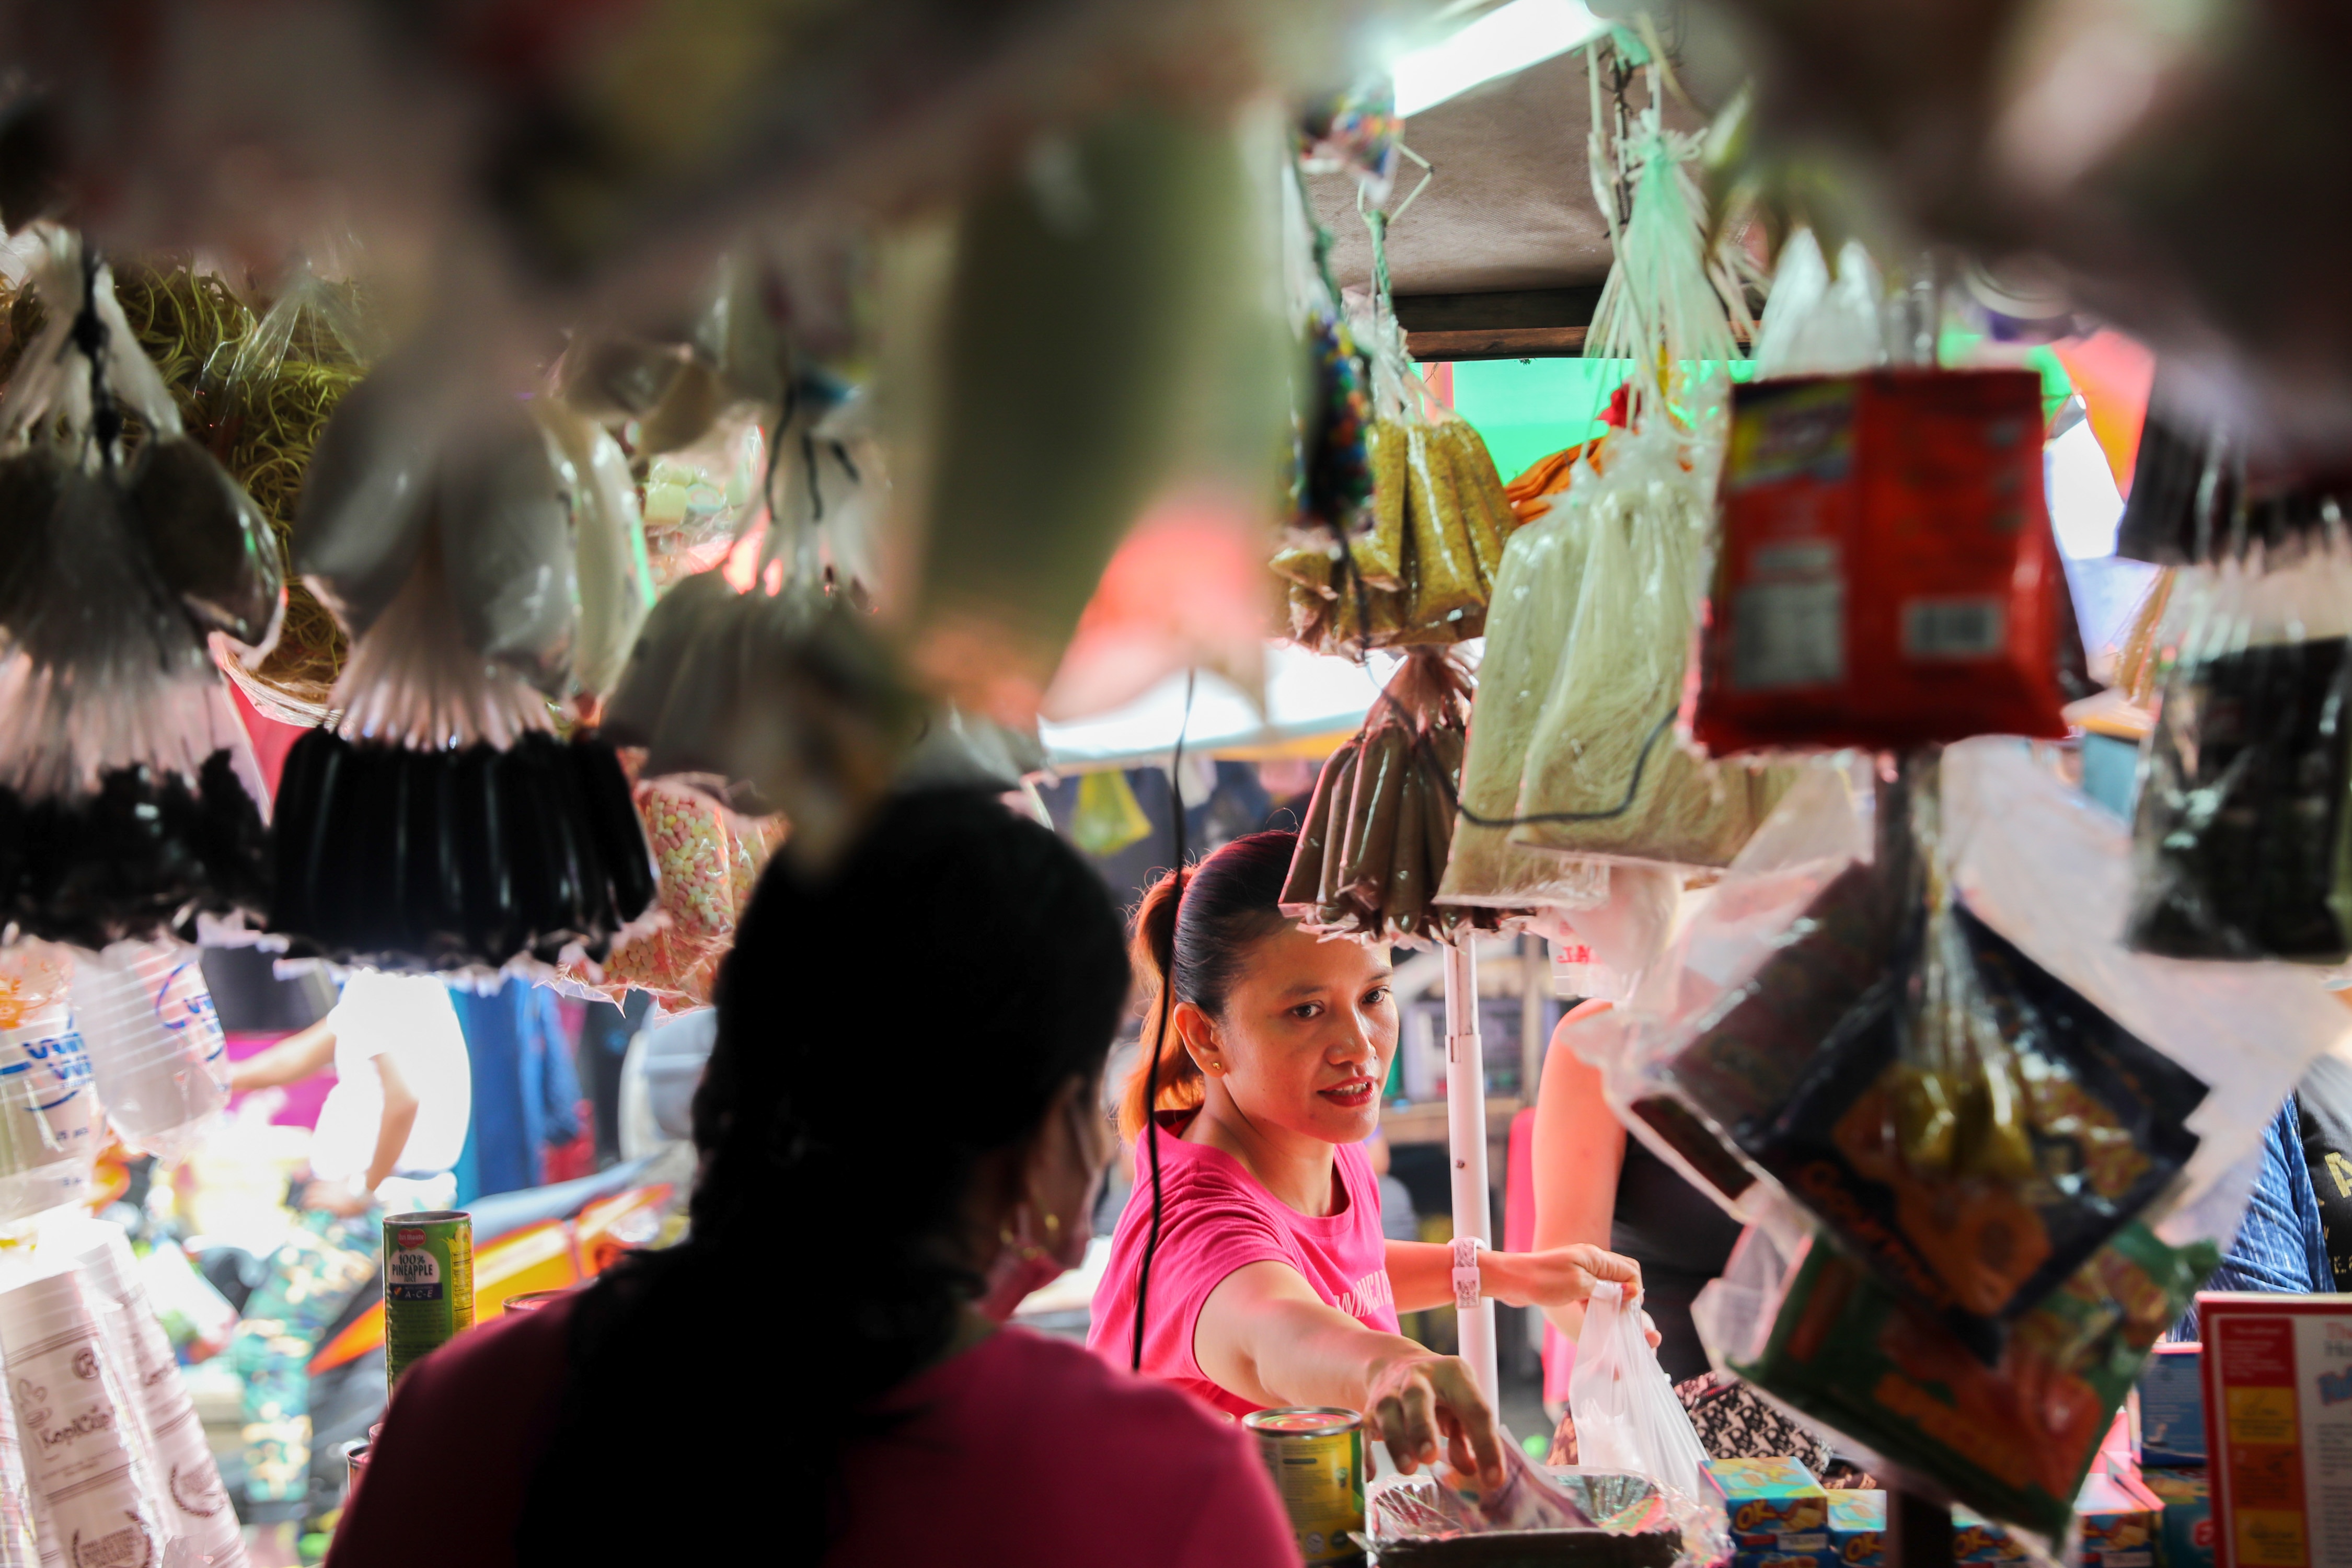 People buy traditional ‘Noche Buena’ (Christmas dinner) items at the Blumentritt Market in Manila on December 20, 2021. Jonathan Cellona, ABS-CBN News/File